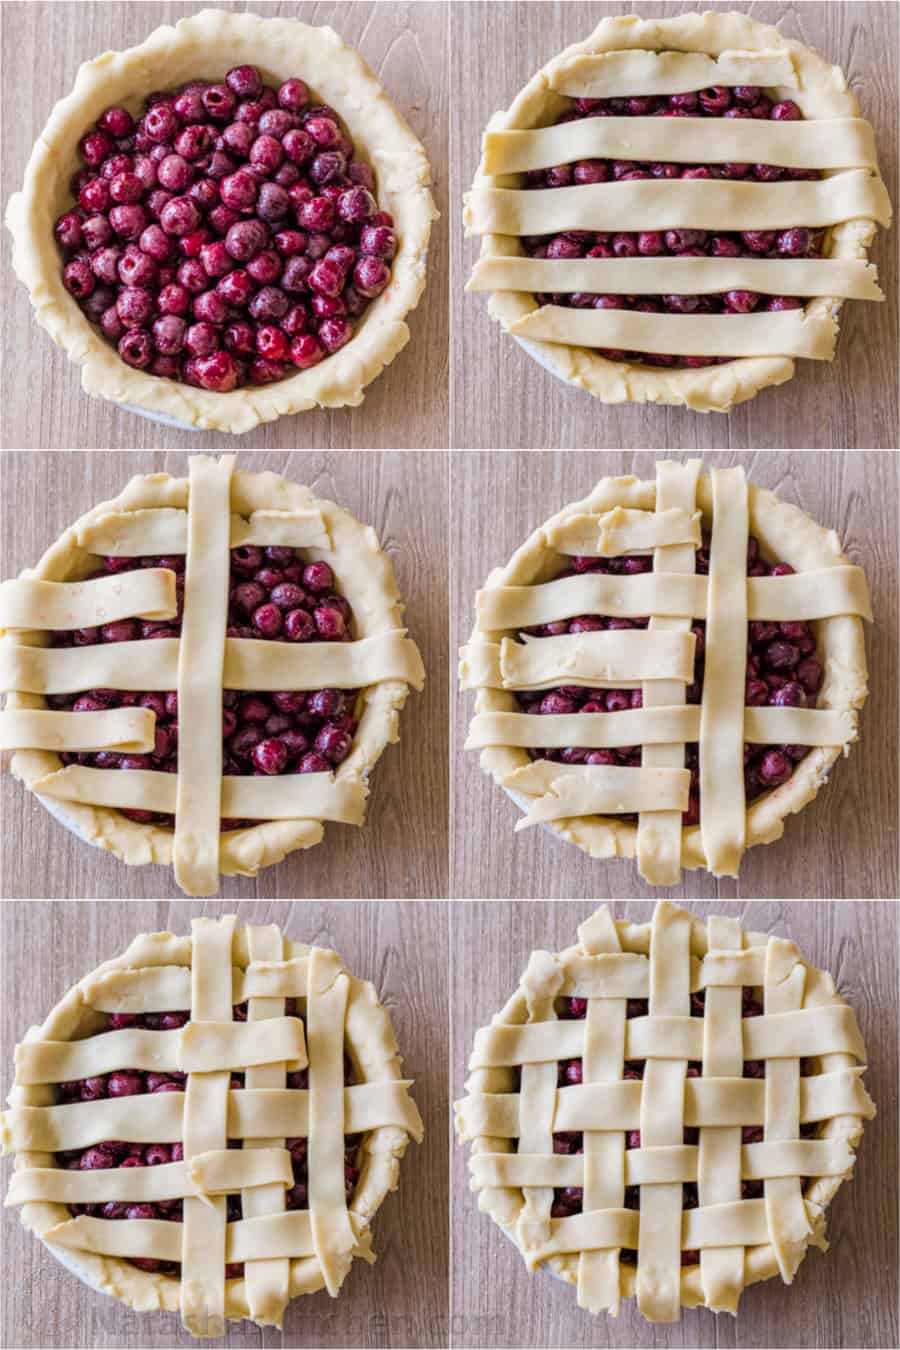 Step by step photos of how to make a lattice pie crust